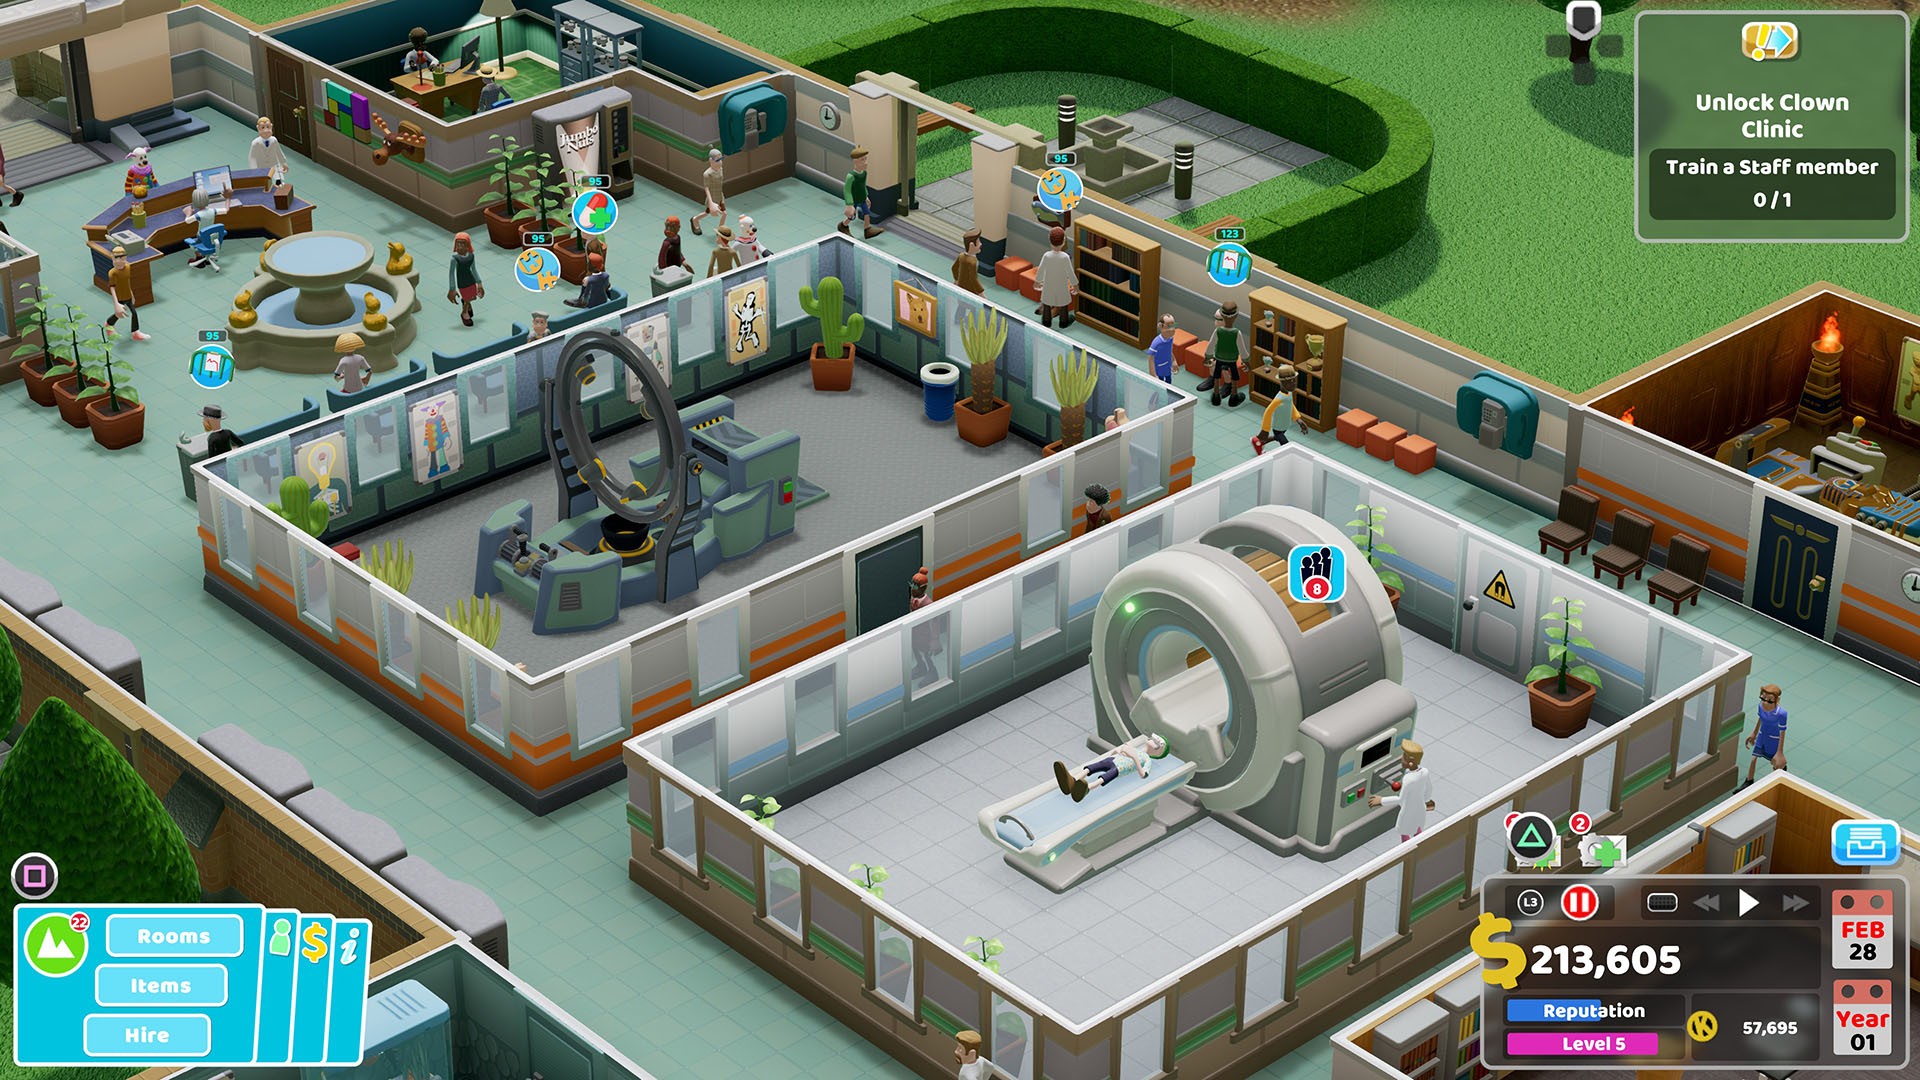 Building, Career, indie, management, medical, Medical Sim, Rating 9/10, SEGA, simulation, Two Point Hospital, Two Point Hospital Review, Two Point Studios, Virtual, Xbox One, Xbox One Review